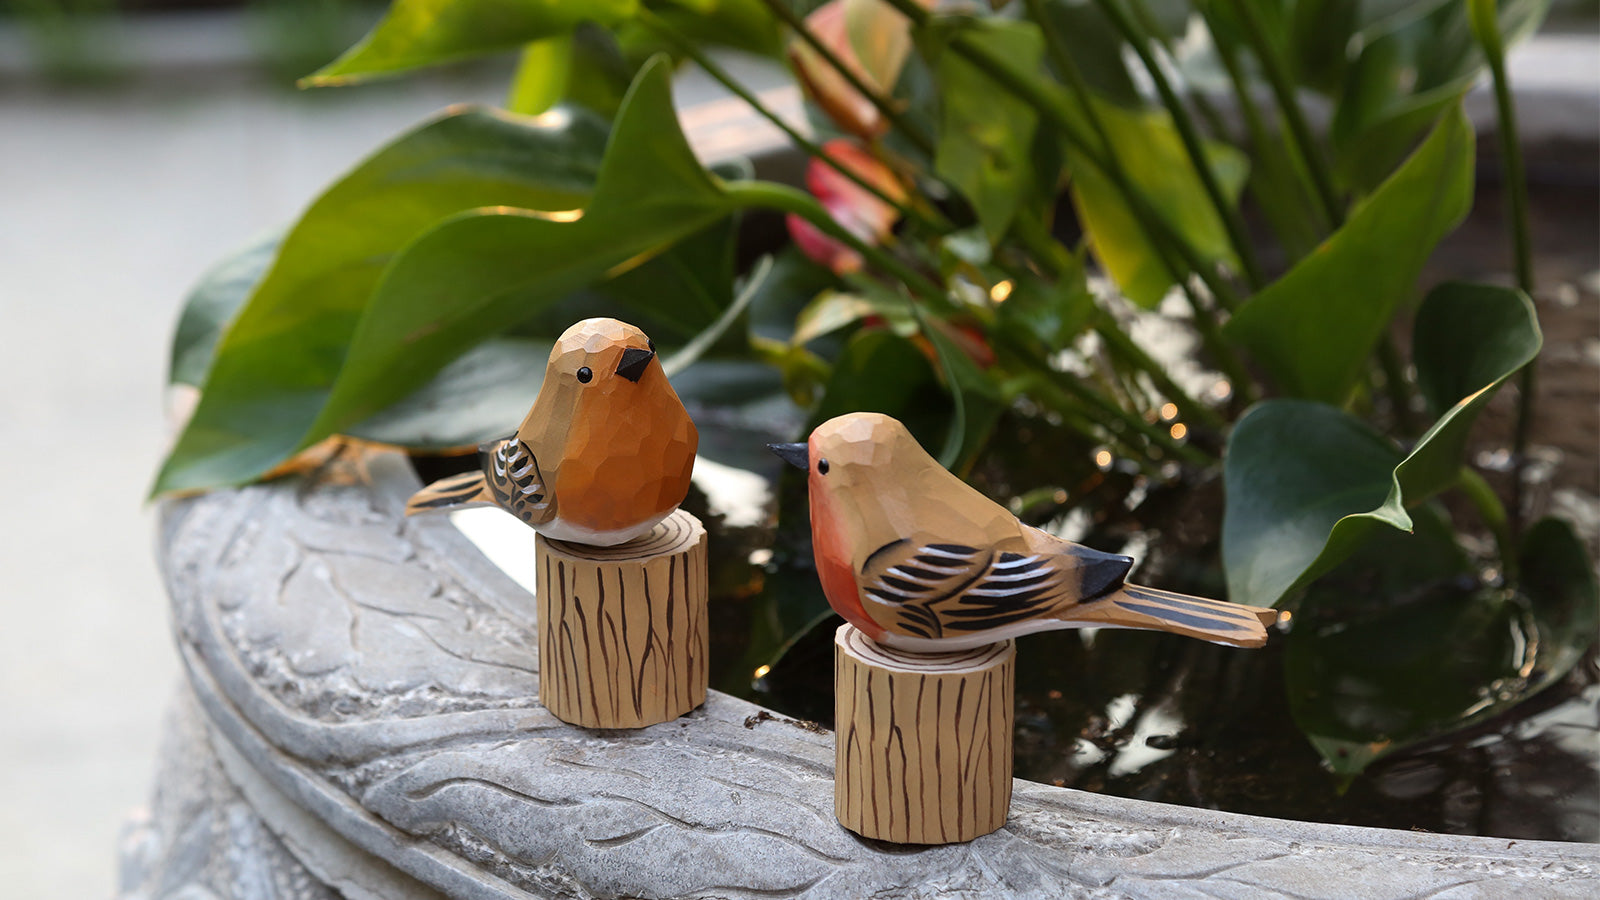 WOODEN CUTIES 🌱 Europe, Unique Gifts & Home Decor